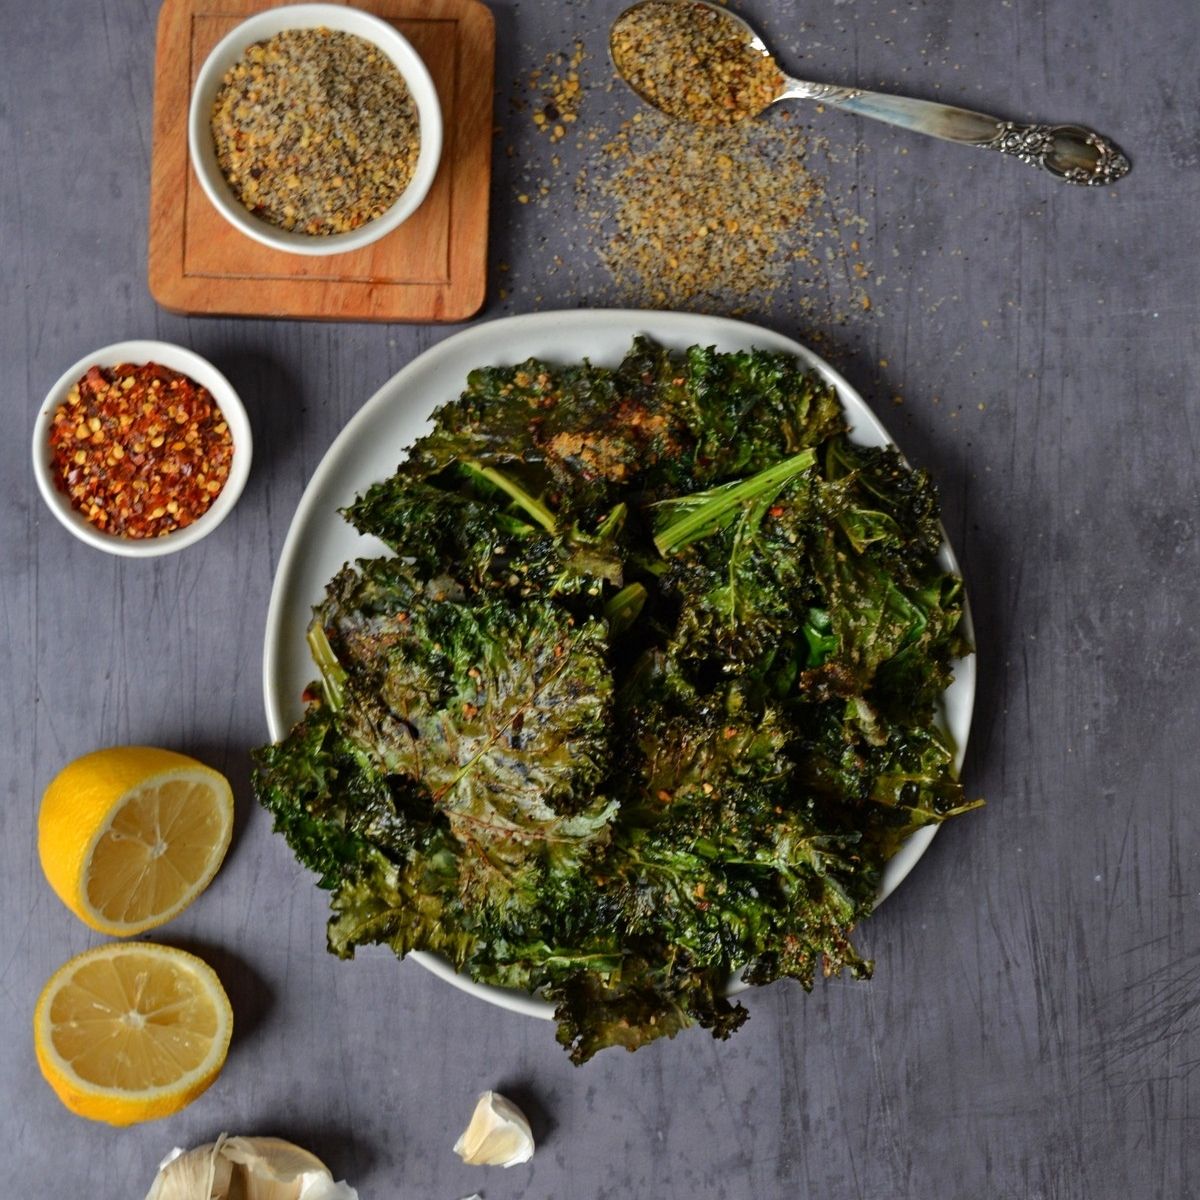 Kale chips on a plate with lemon and spices next to it.